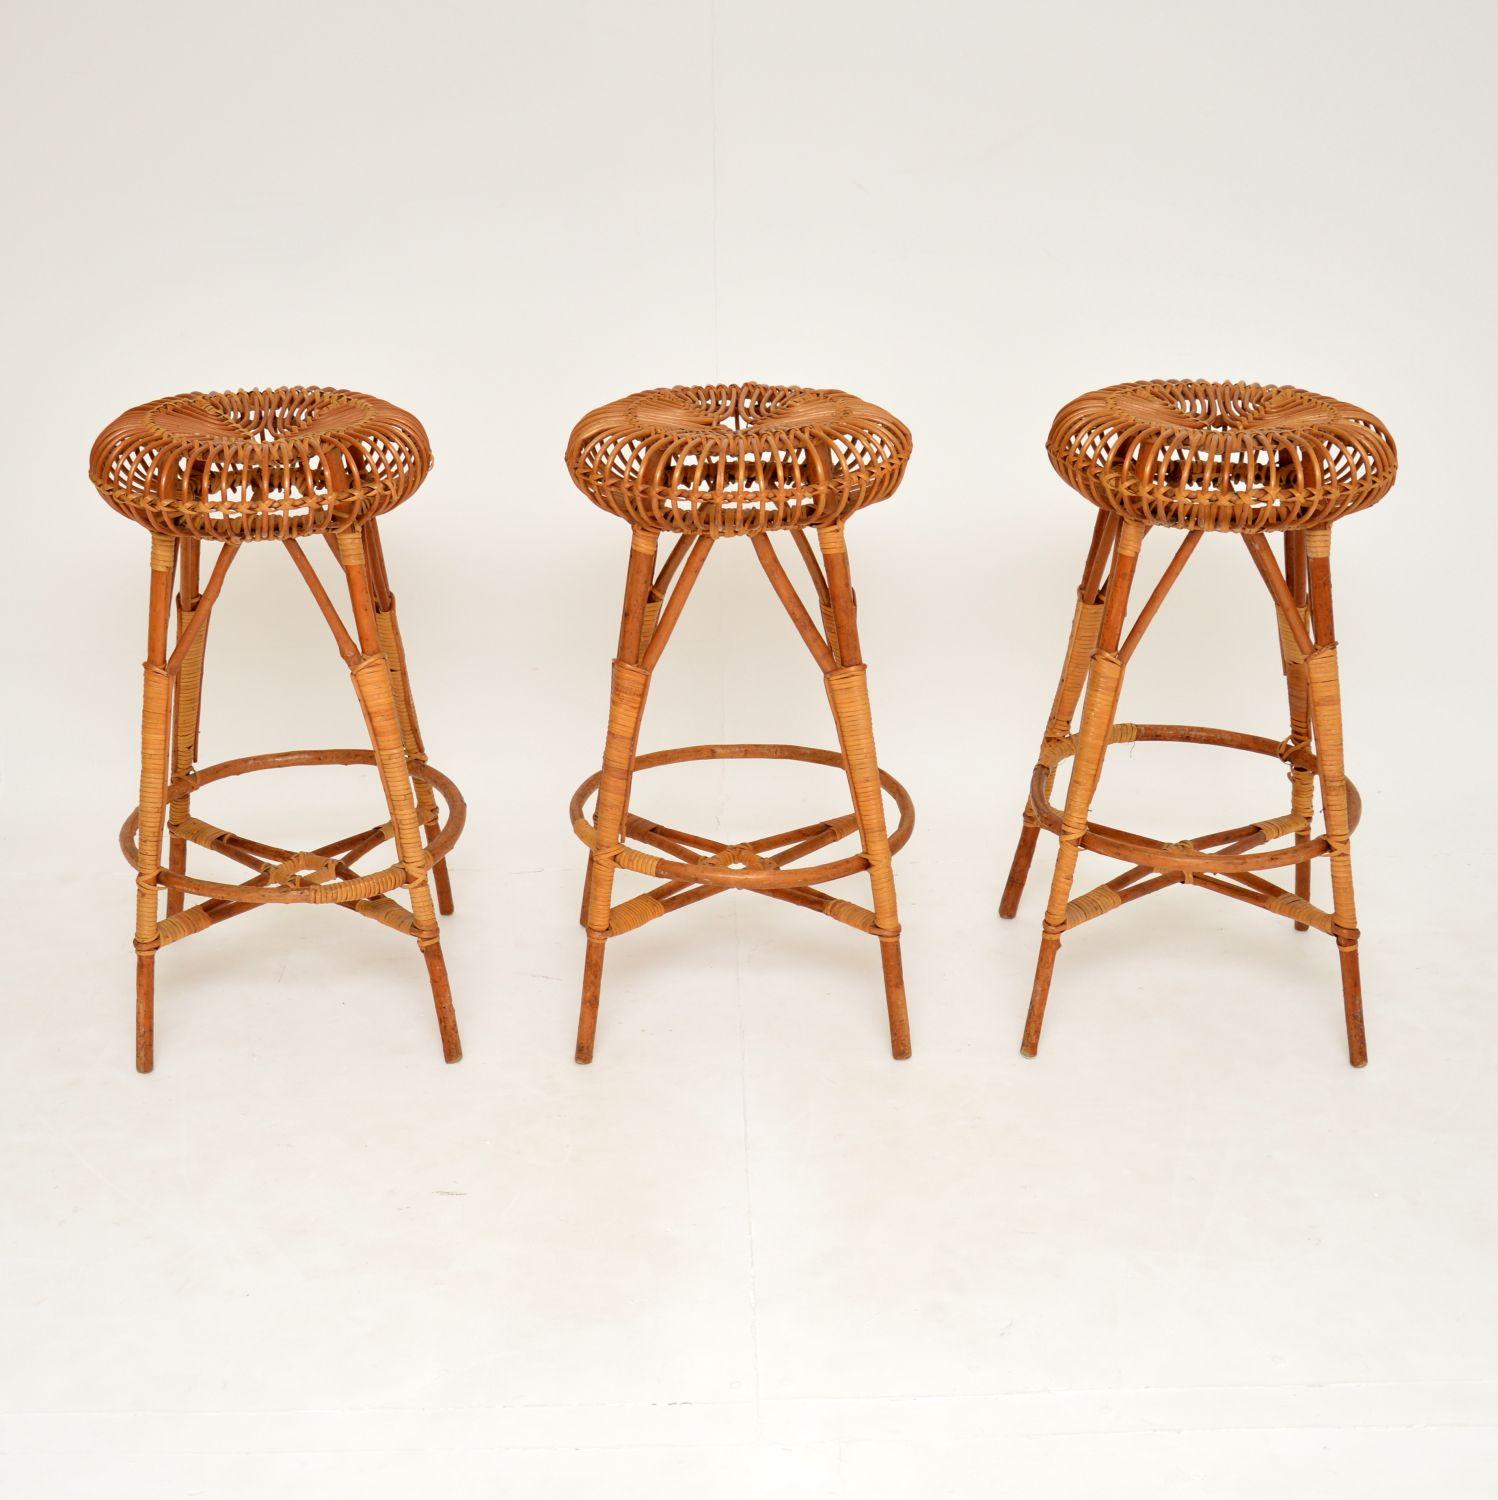 A stunning set of three bamboo bar stools, designed by Franco Albini. These are known as the lobster pot stools, they were made in Italy and date from around the 1970’s.

They are beautifully made and designed, with such a stylish look. The